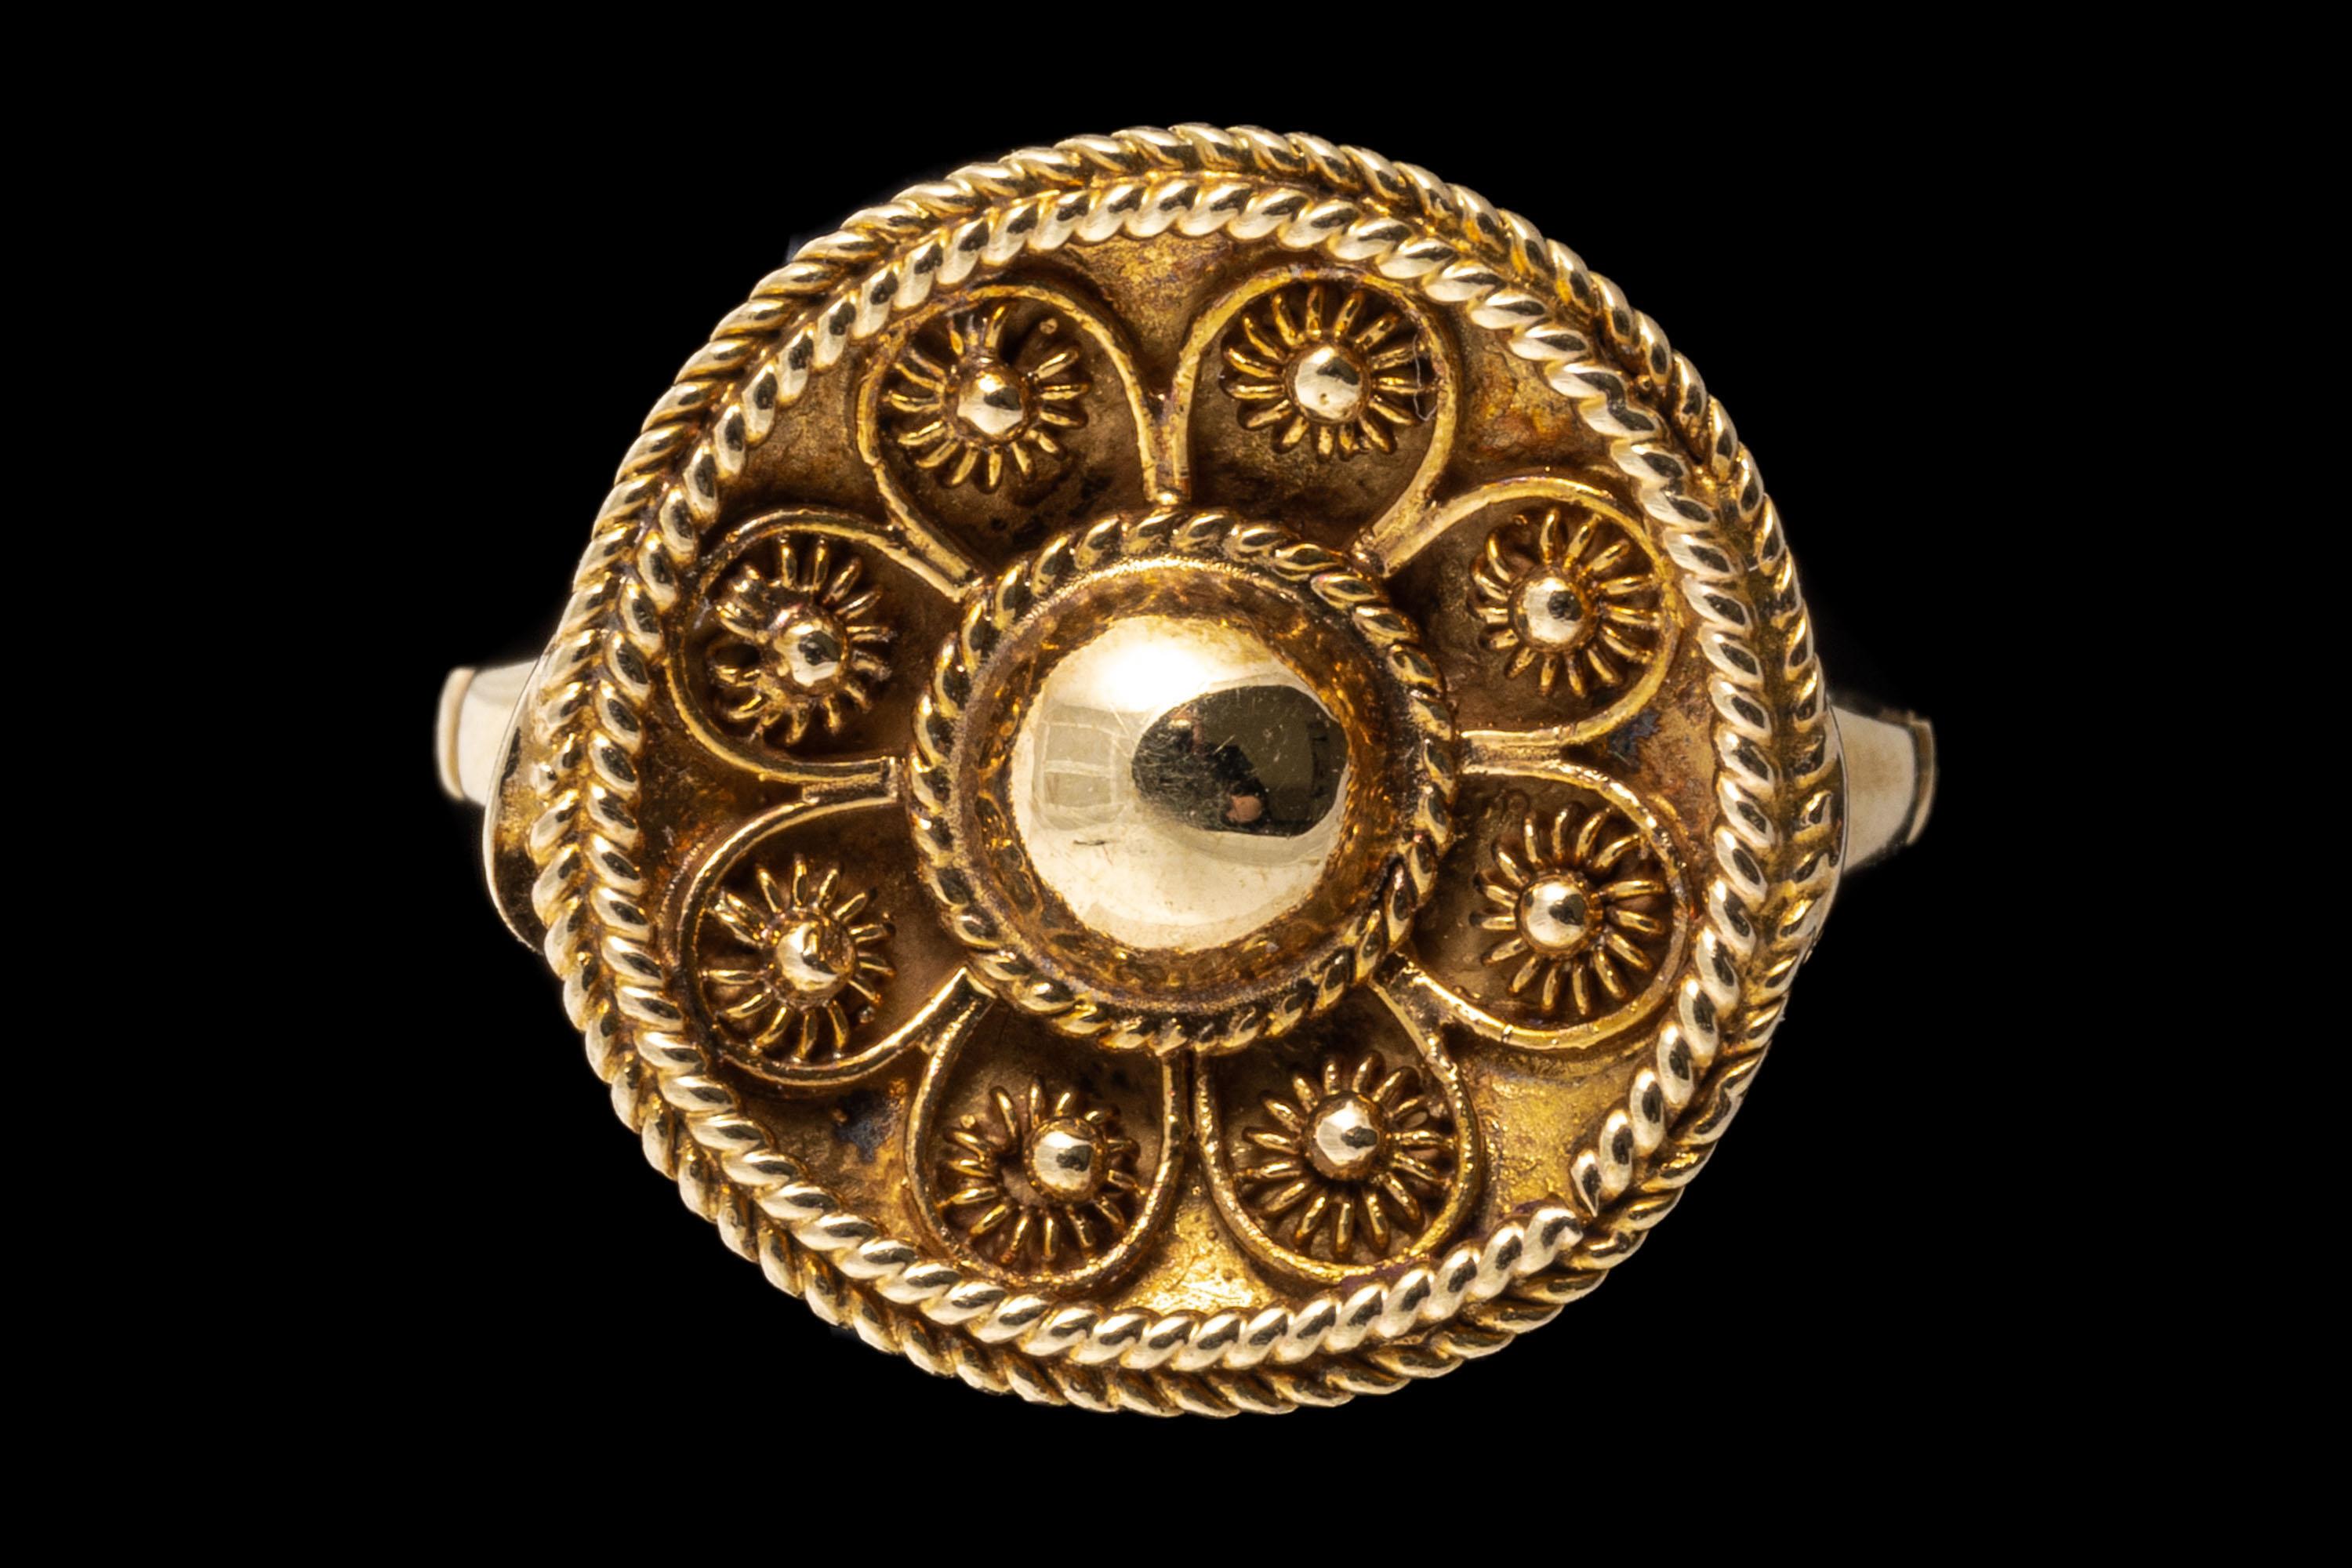 12k yellow gold ring. This pretty, ornate ring is a round profile top, with an Etruscan style patterning and a rope edged frame. The ring is finished with indented, concave shoulders.
Marks: None, tests 12k
Dimensions: 9/16